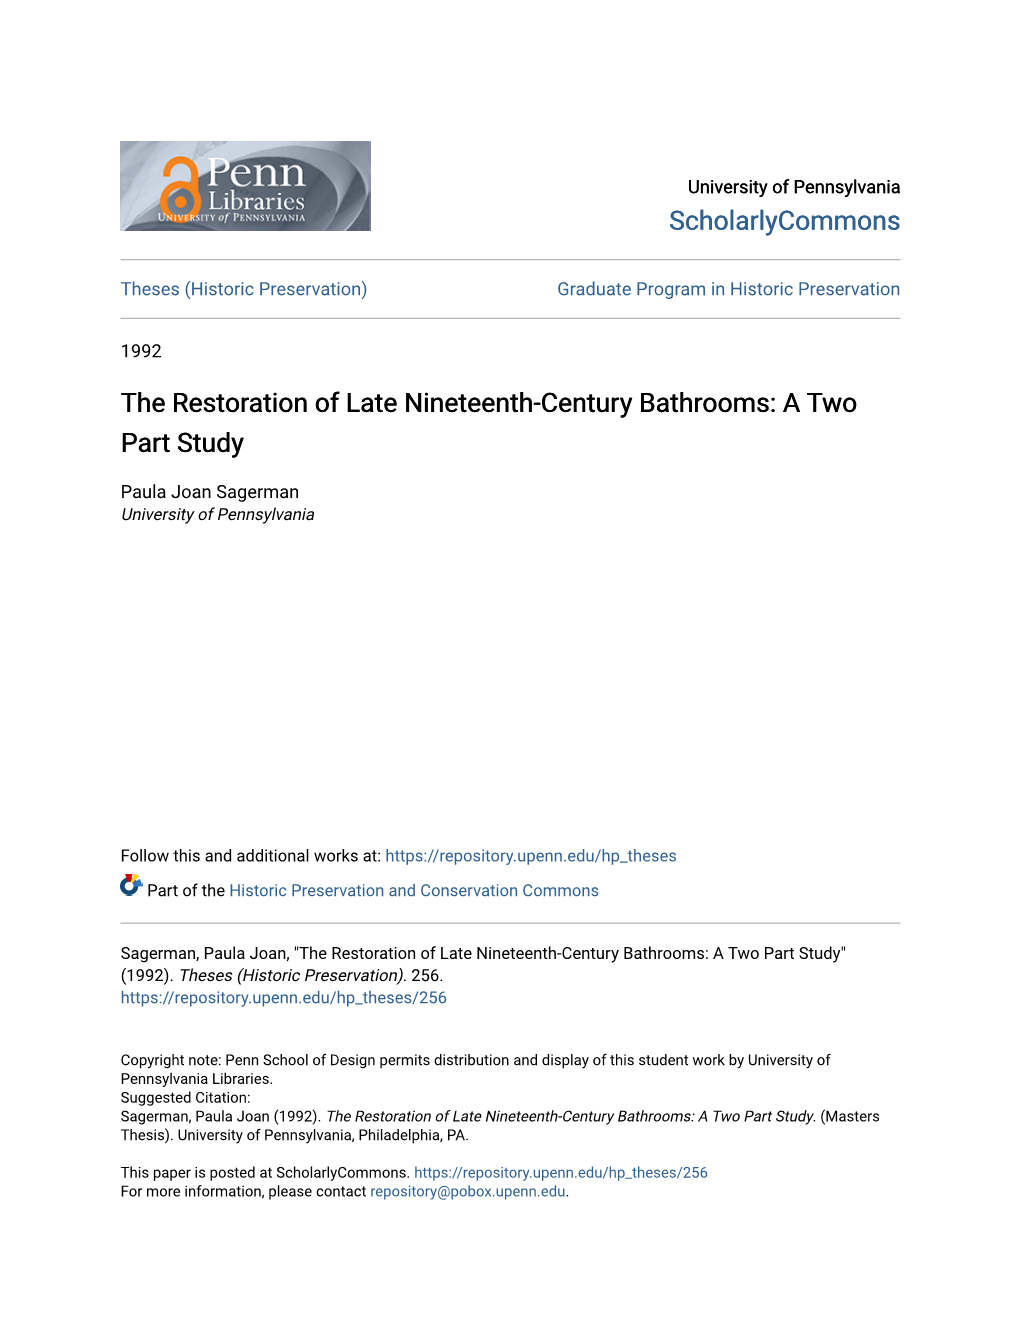 The Restoration of Late Nineteenth-Century Bathrooms: a Two Part Study